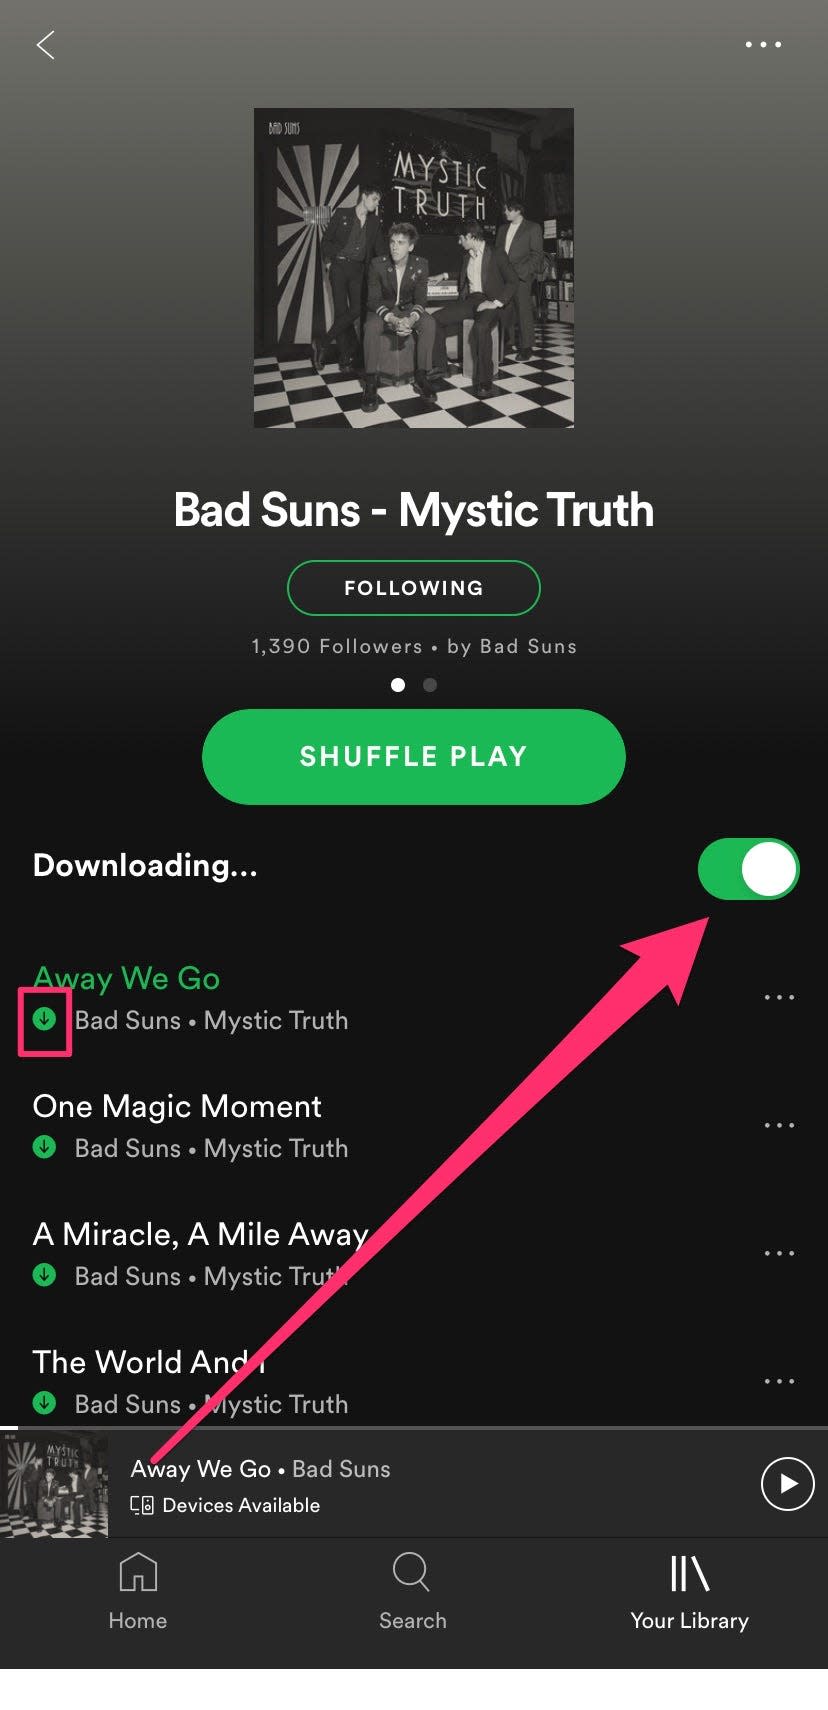 How to download music from Spotify